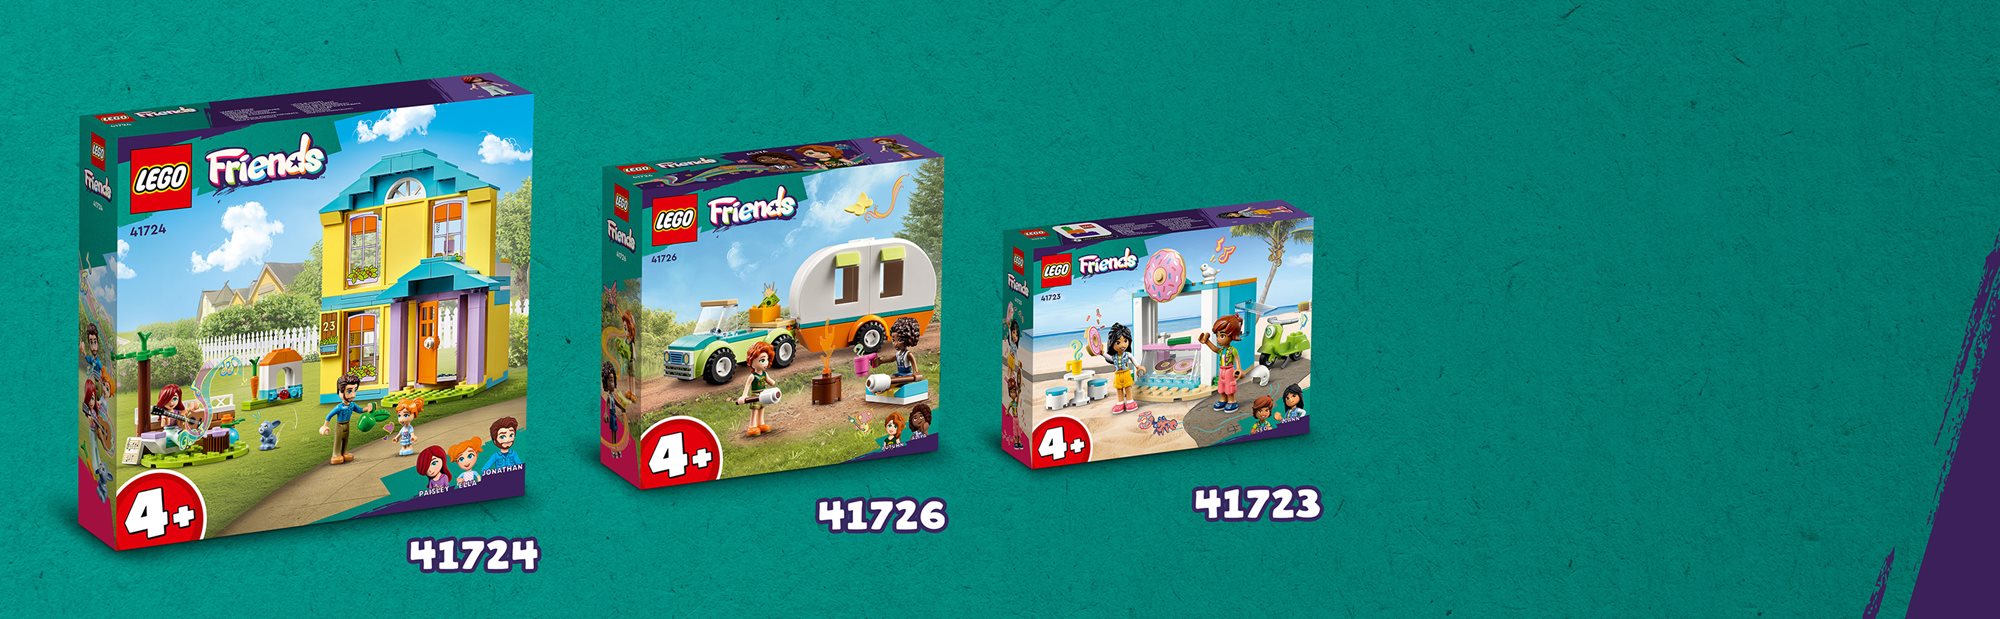 LEGO Friends Holiday Camping Trip 41726, Toy Caravan with Car, Toy Camper  Van, Pretend Play Toy Camping Set for Kids, Girls and Boys 4+ Year Old